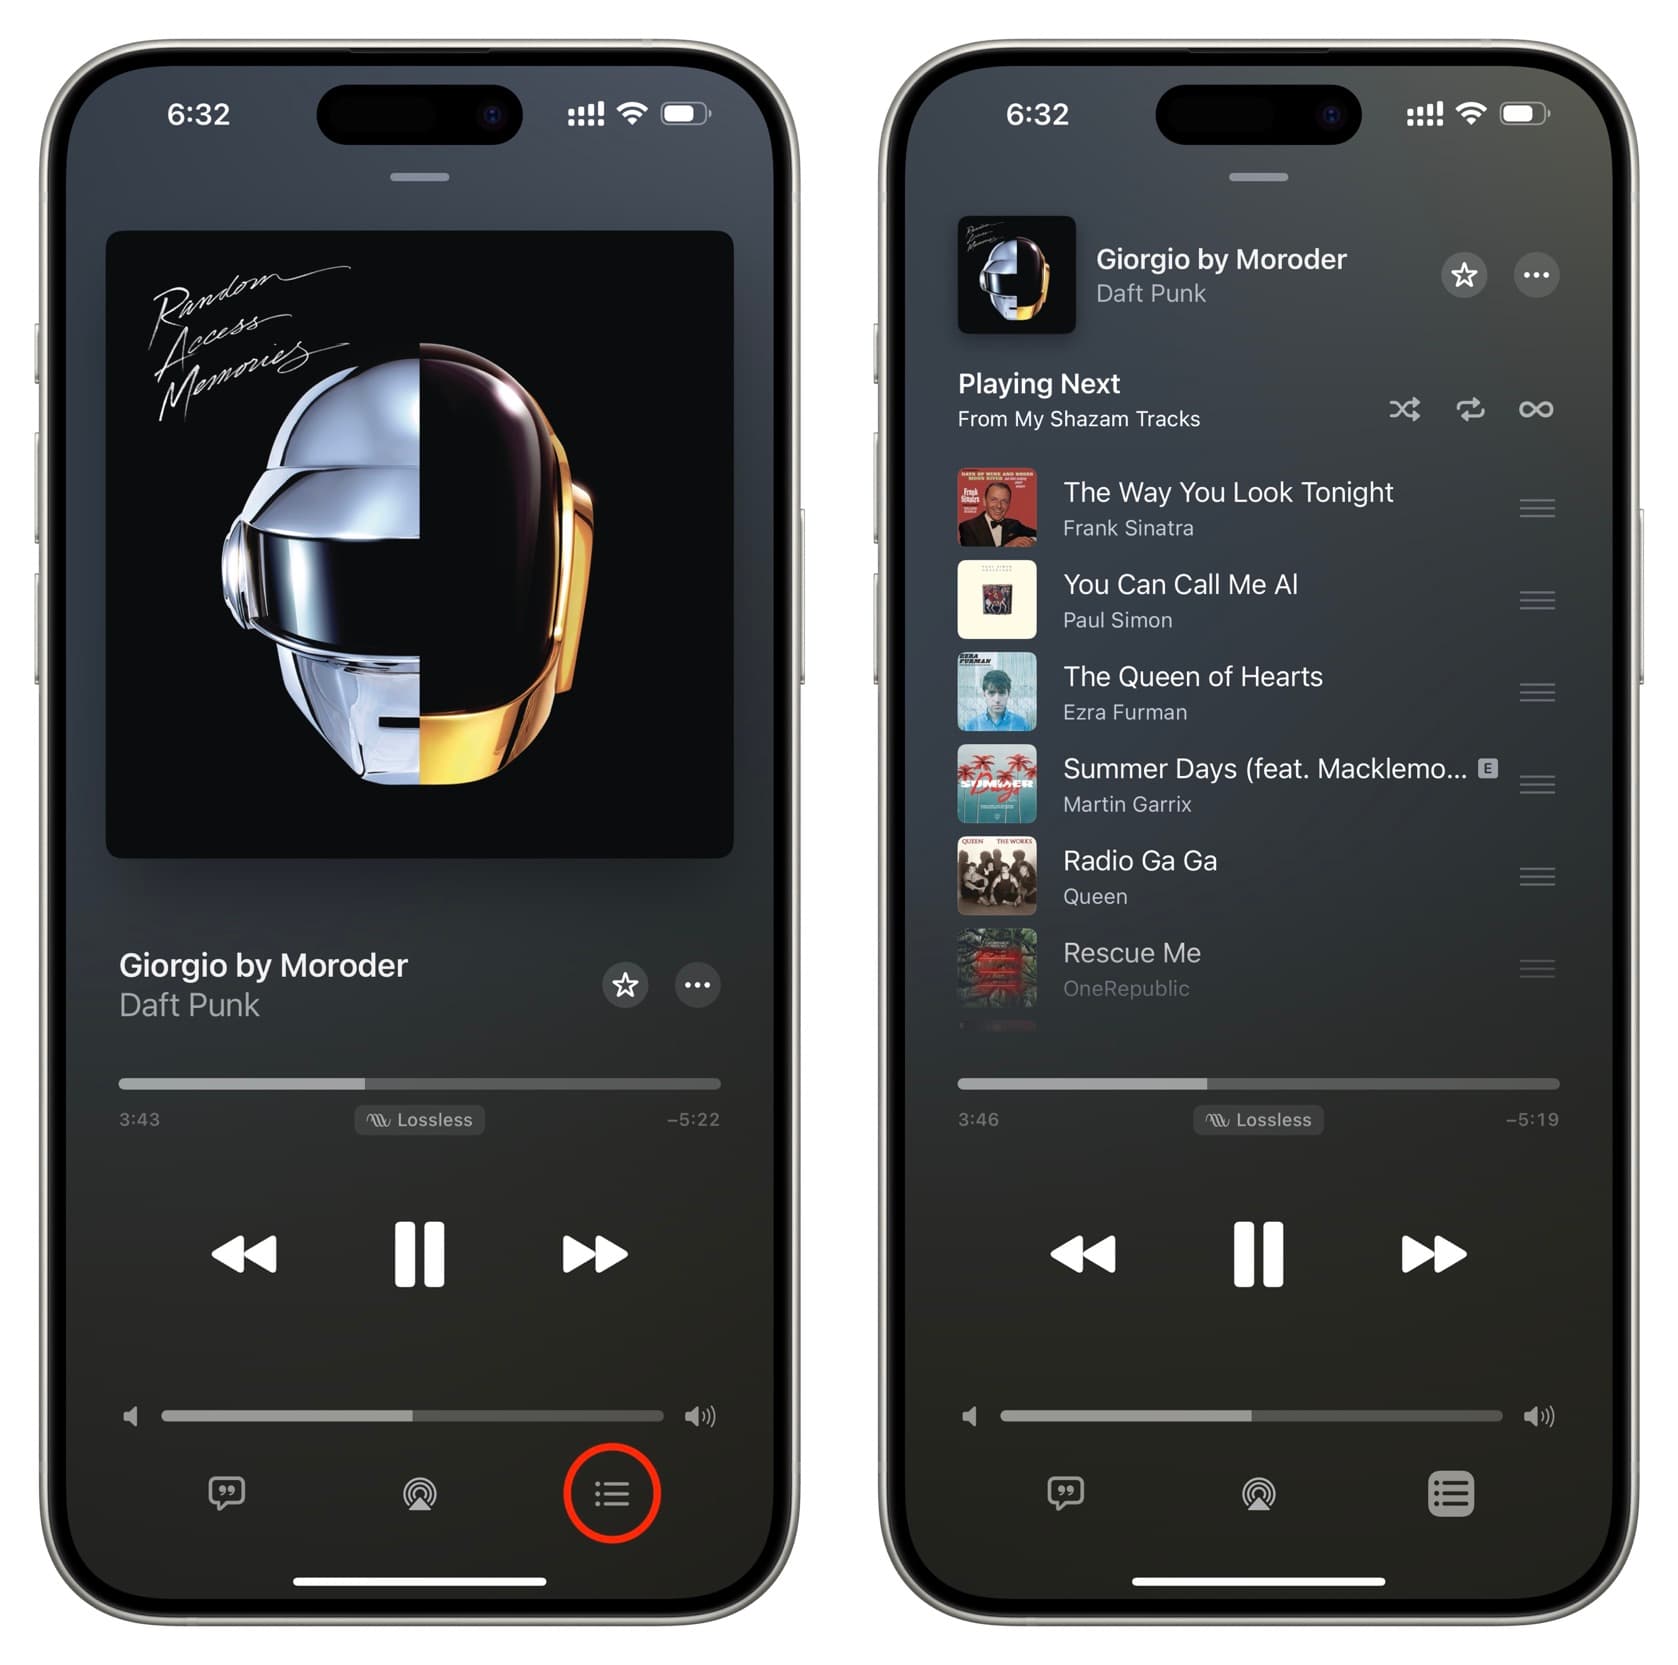 View songs playing next in the queue in Apple Music